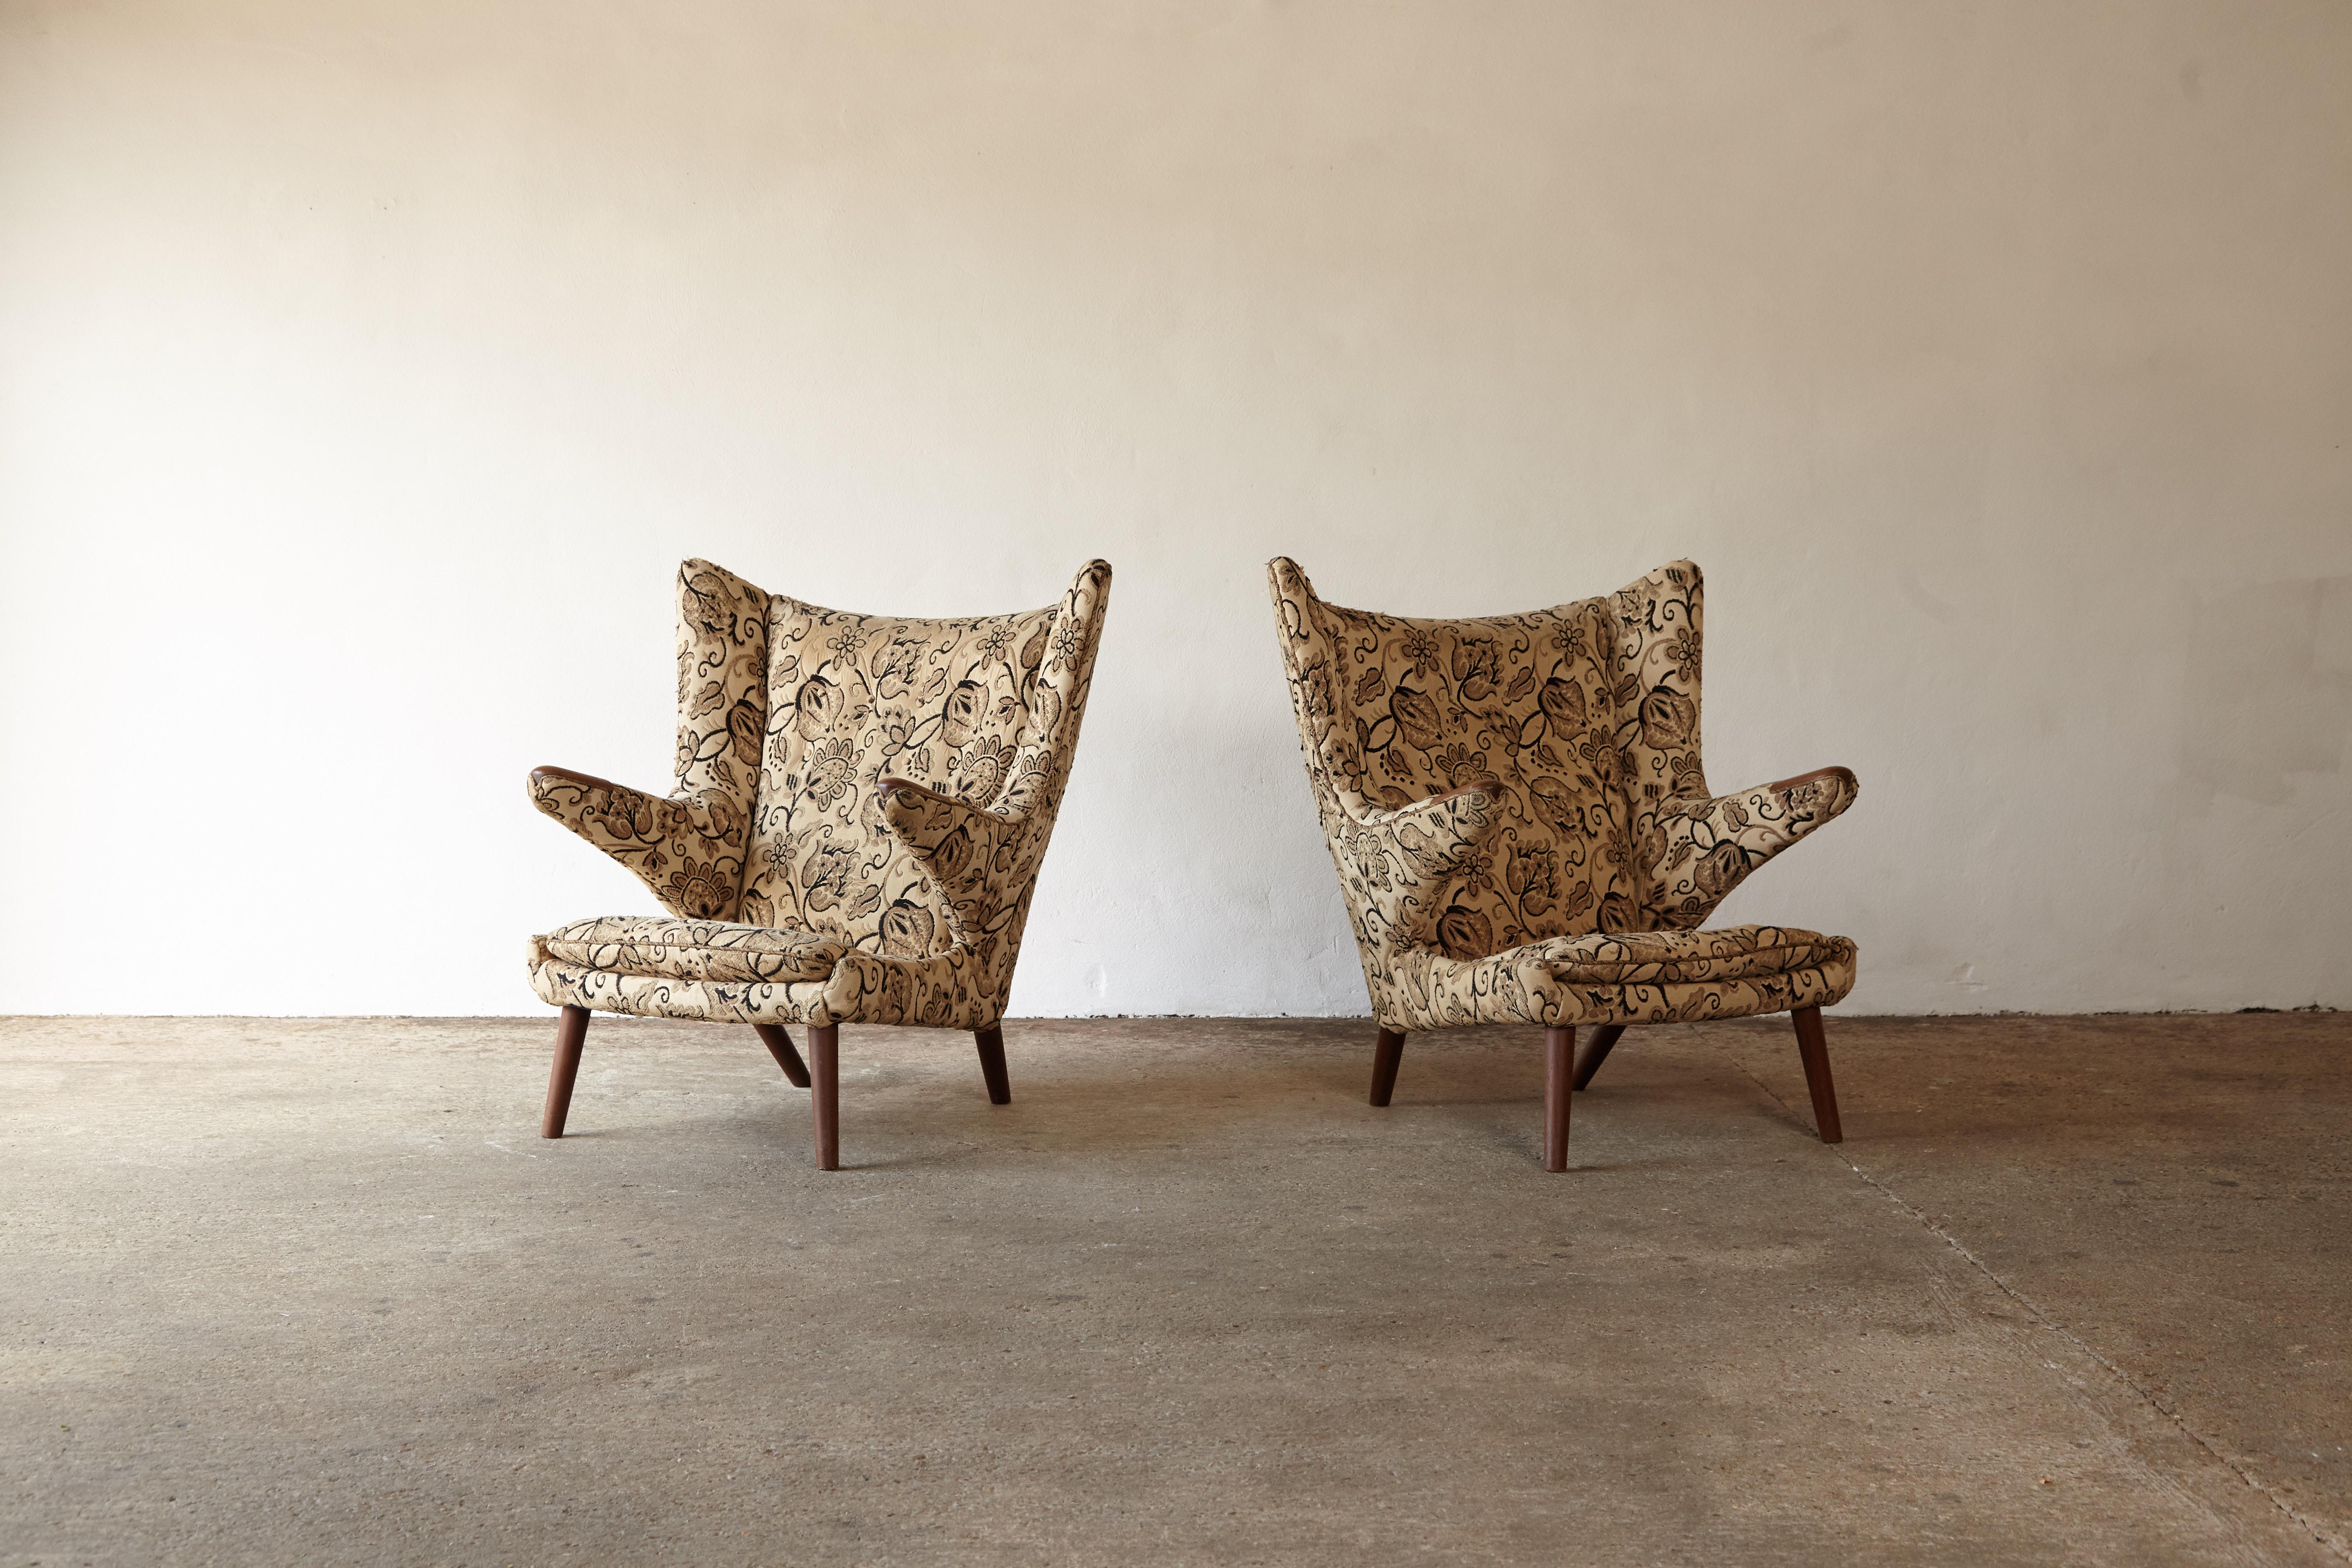 An original pair of Hans Wegner papa bear chairs designed in 1947 and produced by AP Stolen in Denmark in the 1950s. The fabric is damaged so these are offered in their current original condition for the customer to upholster in their own choice of